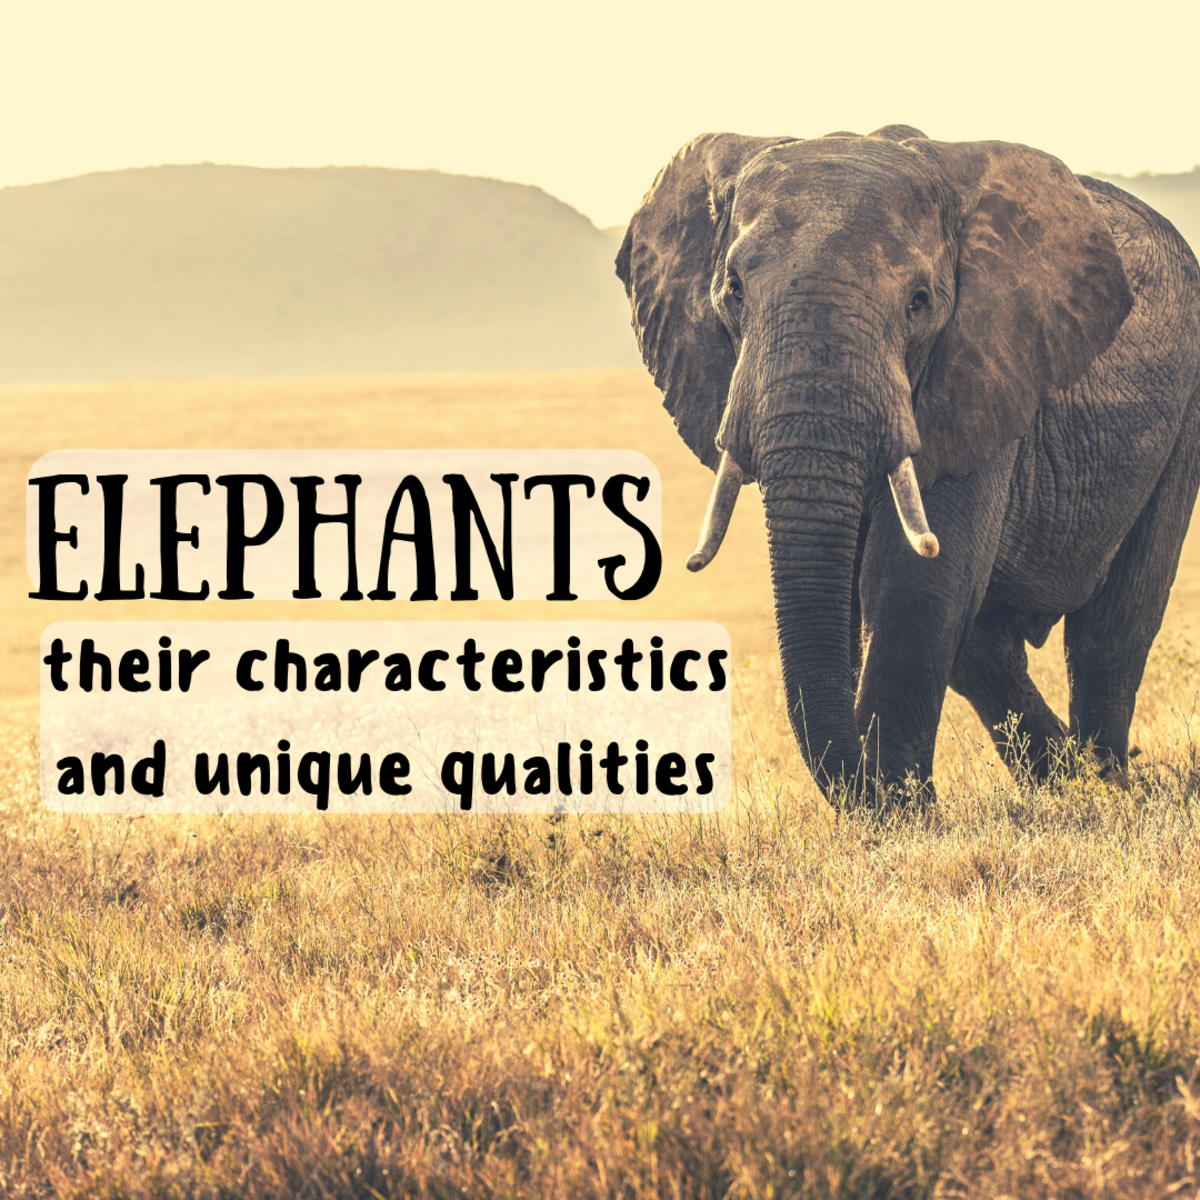 Read on for elephants facts and in-depth info on this animal's unique characteristics.